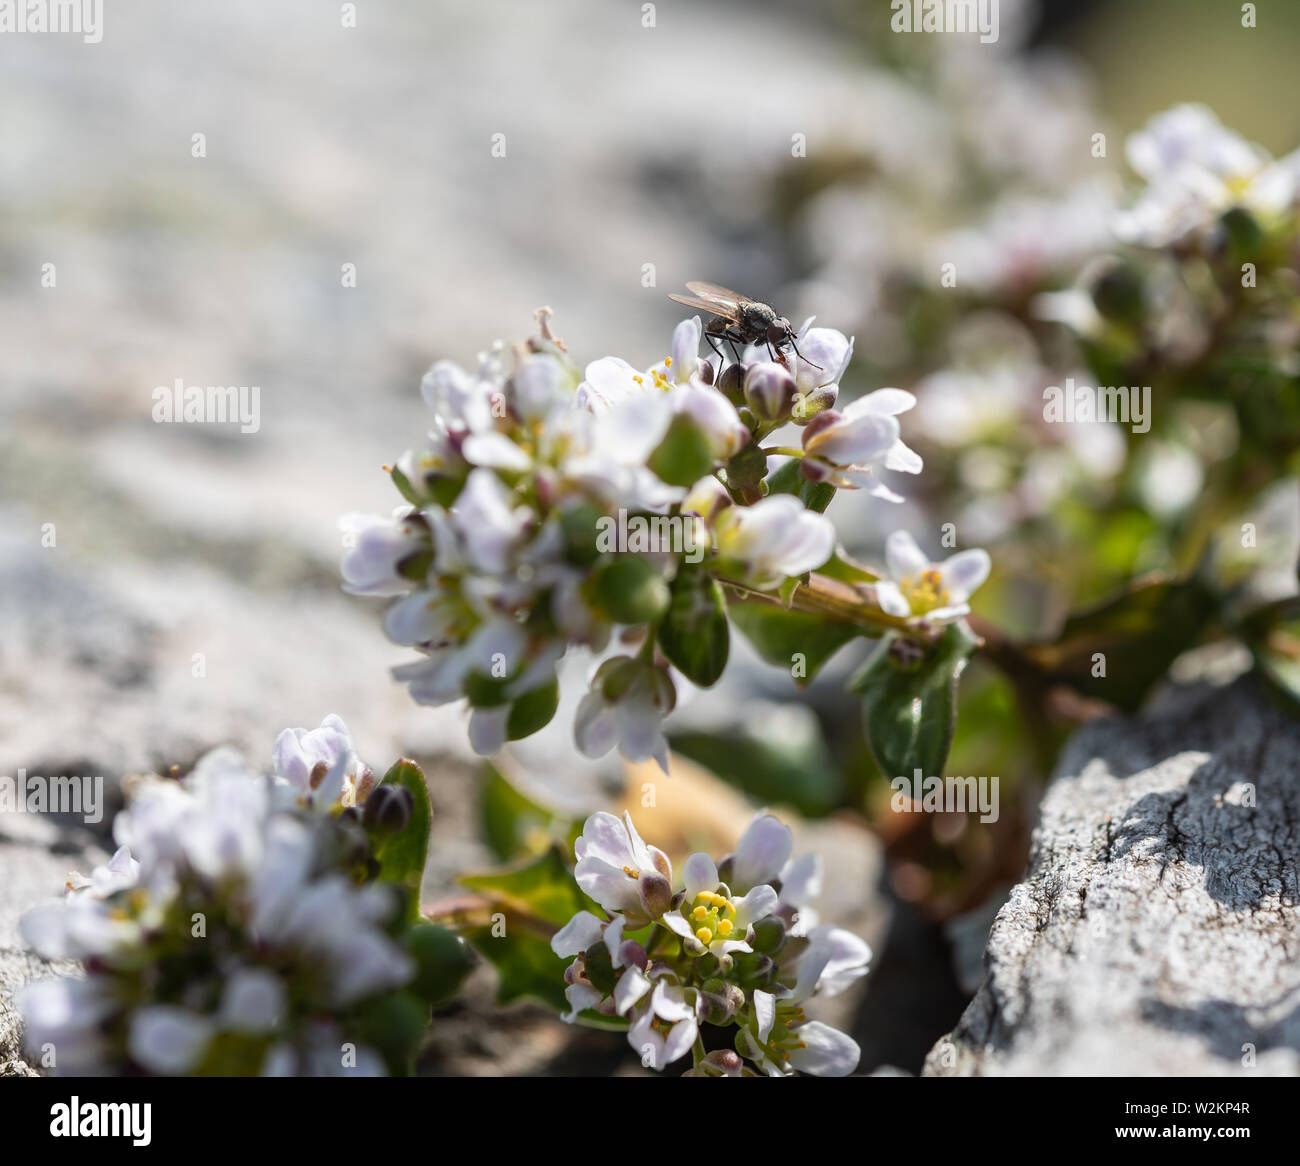 White alyssum plant flower close-up, growing in rocks Stock Photo